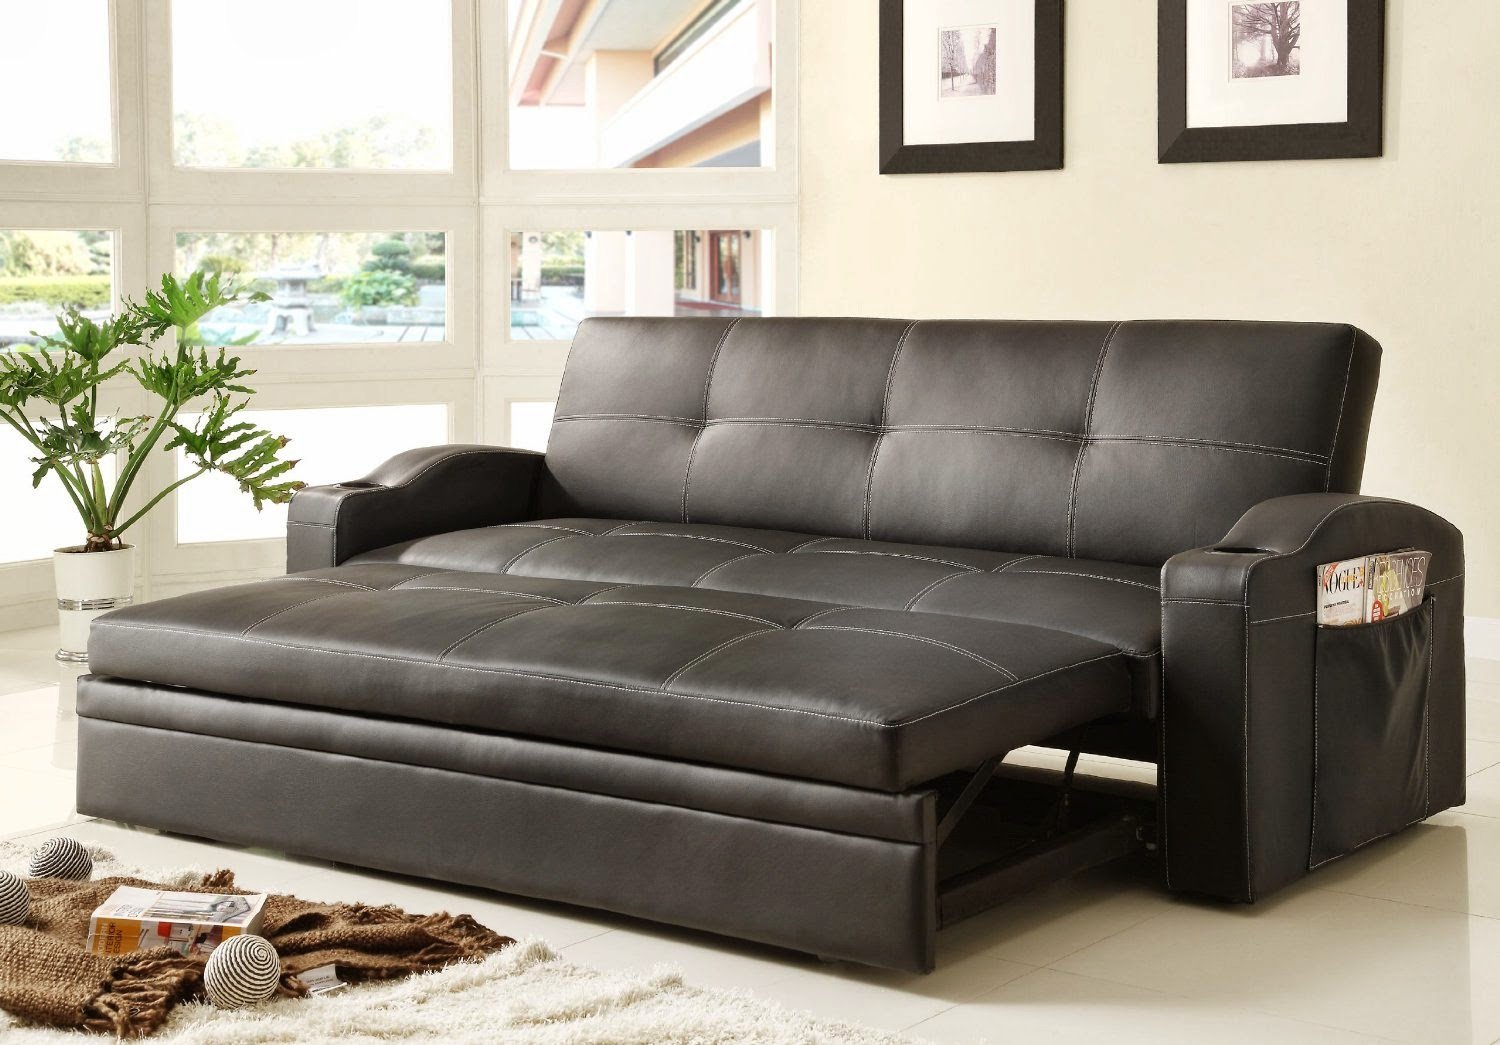 Comfort Meets Convenience: Sofa Beds Made For Your Requirement